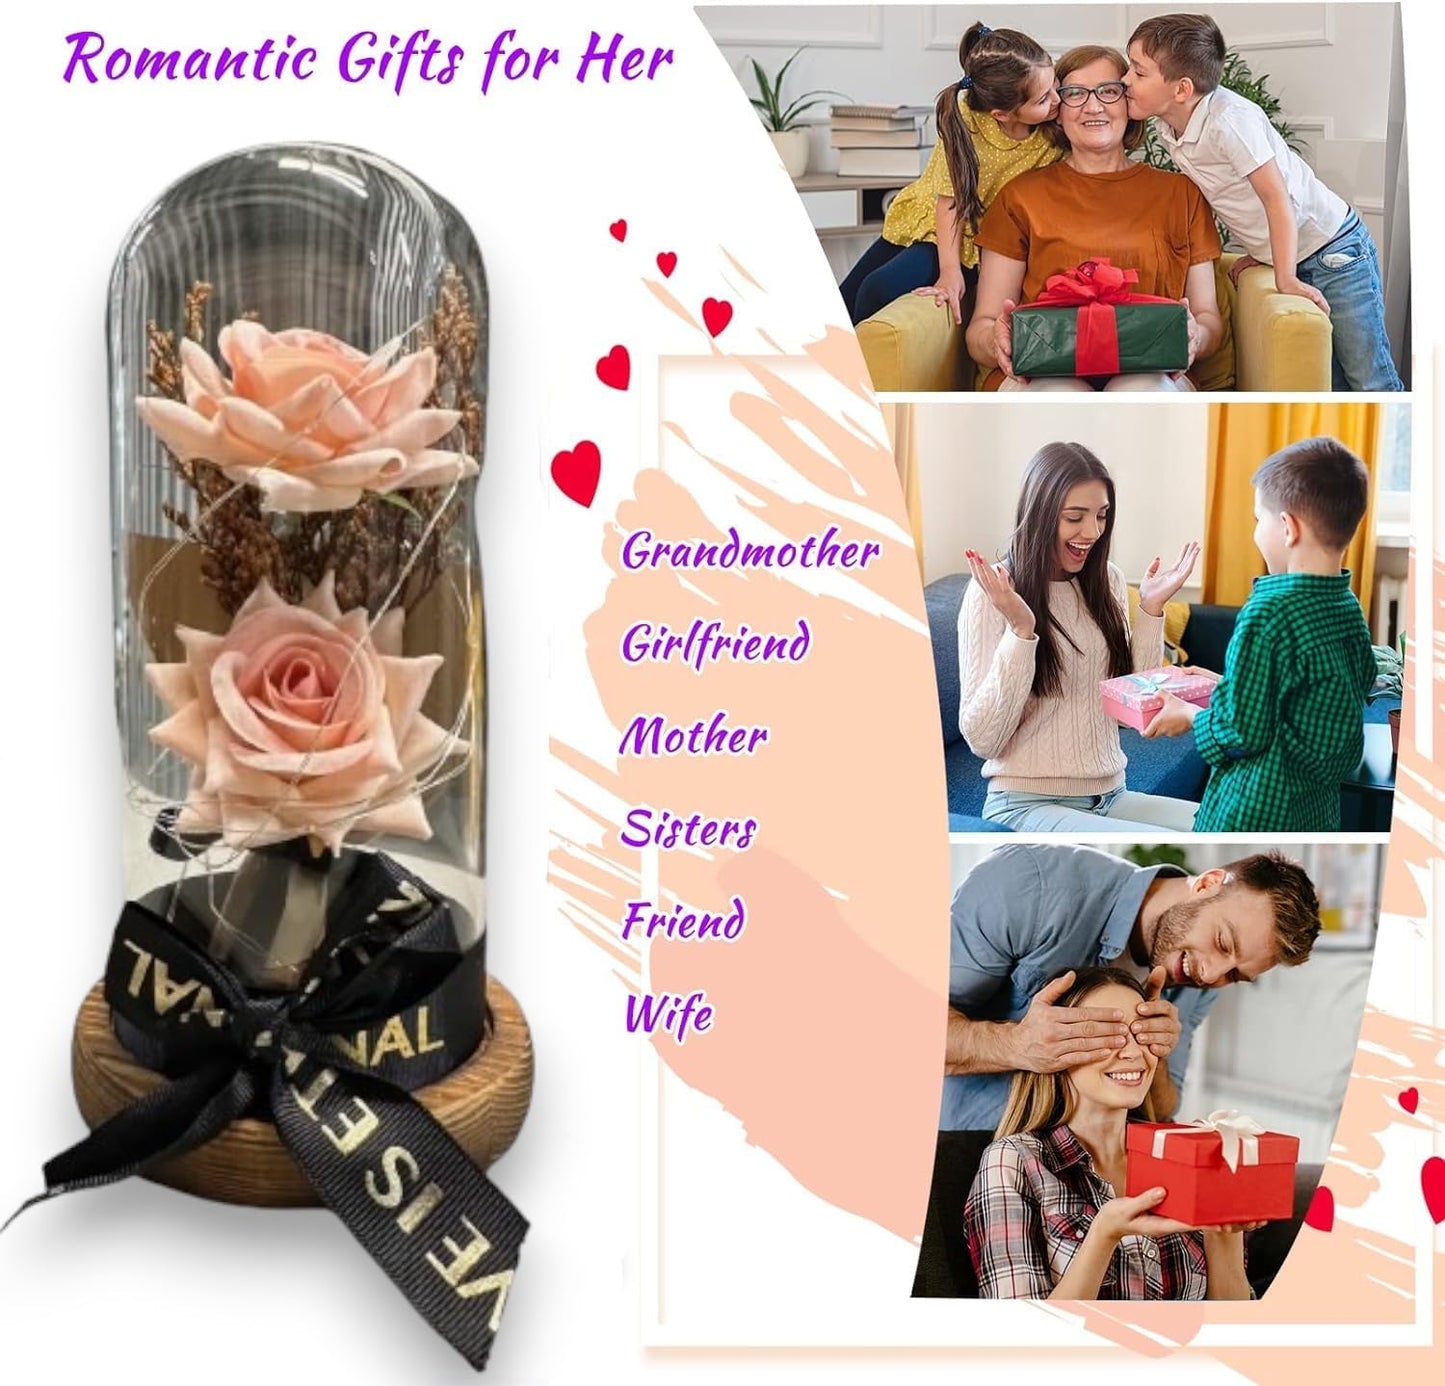 Preserved Rose Gifts for Women